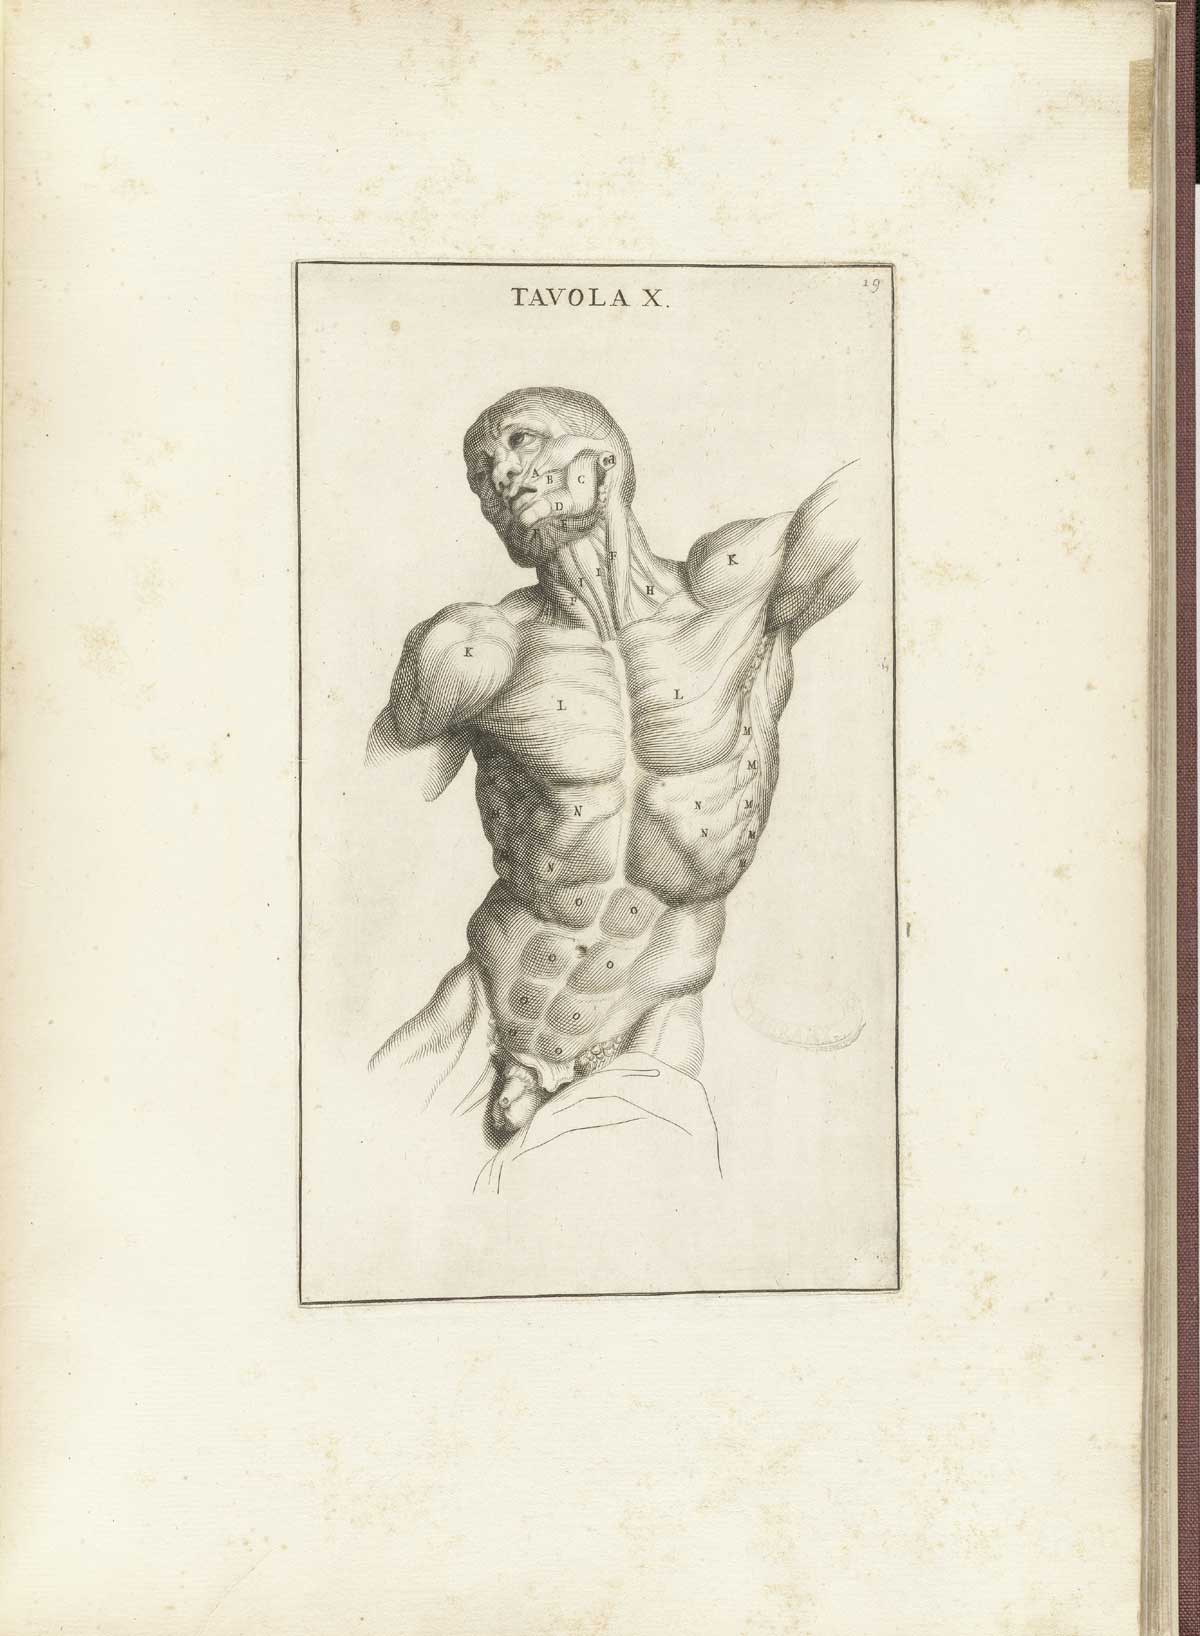 Engraving of a facing muscle figure from the waist up looking off to the left of the page, with flesh removed to show detail of the muscles of the head, neck, chest, and abdomen; from Bernardino Genga’s Anatomia per uso et intelligenza del disegno, NLM Call no.: WZ 250 G329an 1691.